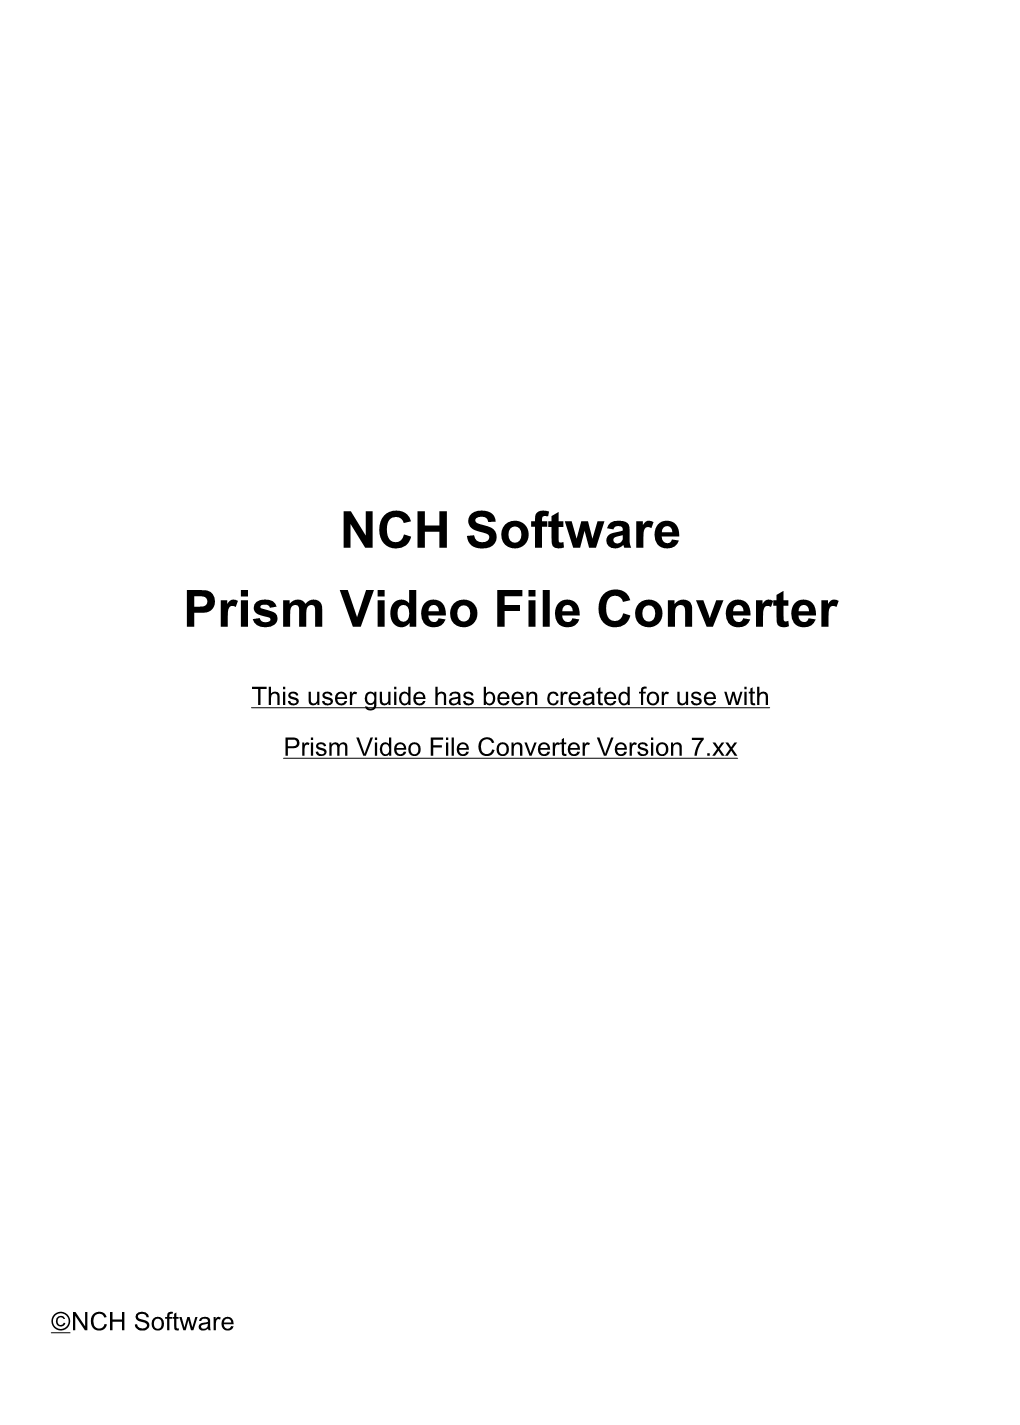 NCH Software Prism Video File Converter